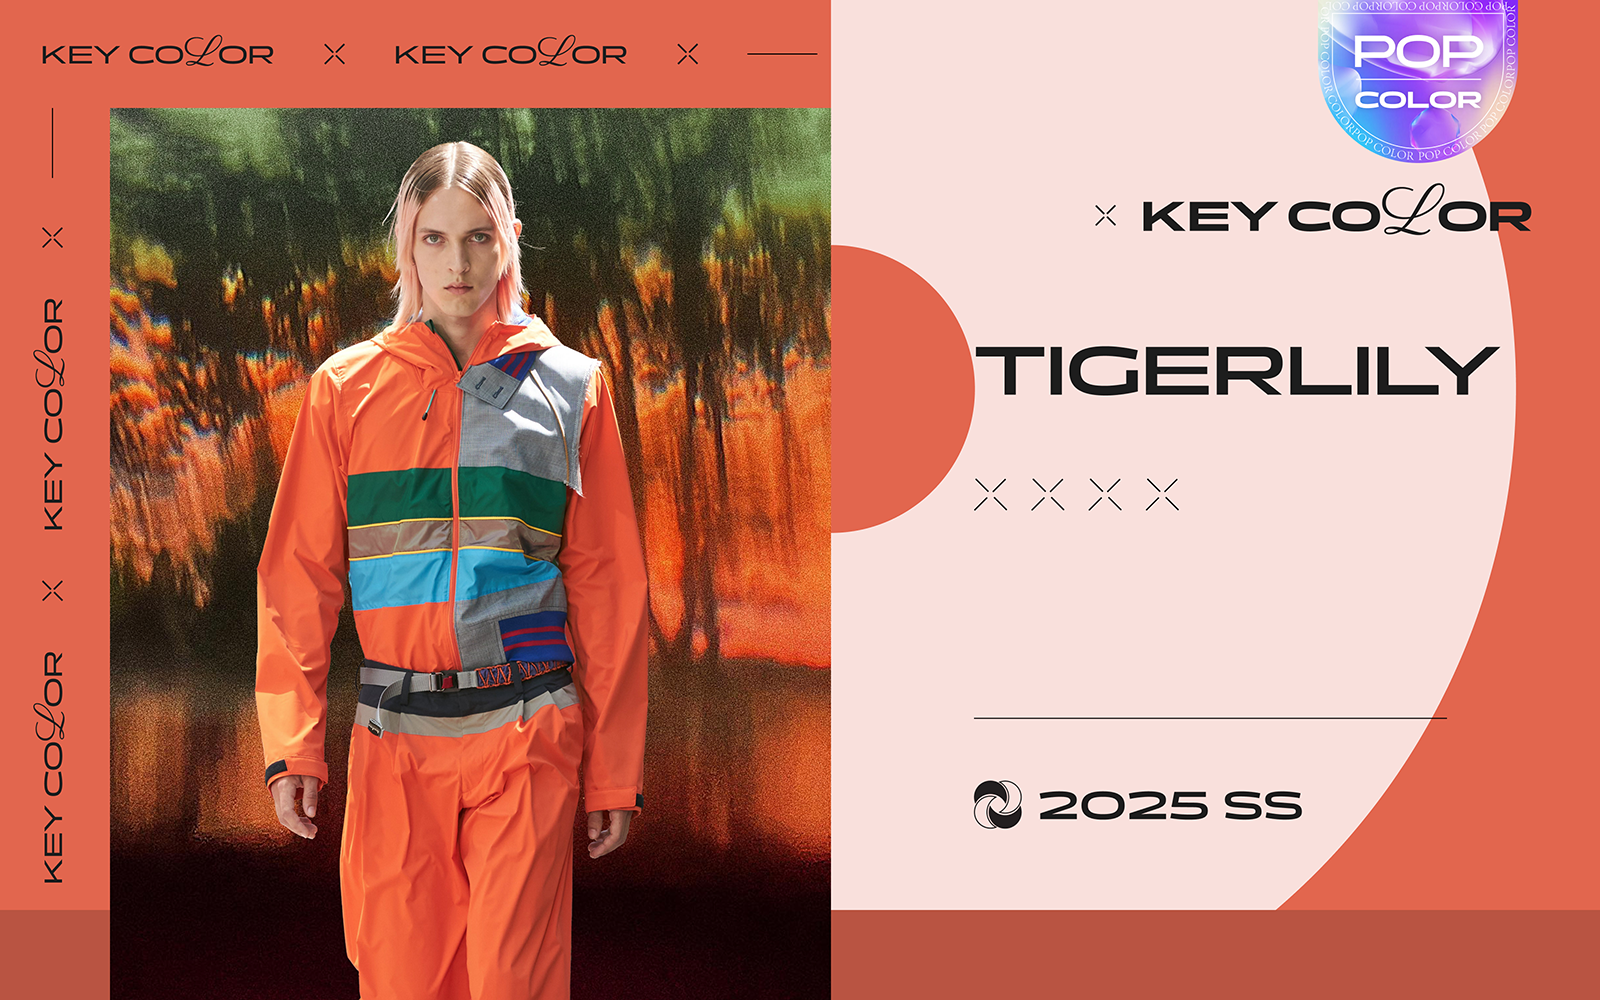 Tigerlily -- The Color Trend for Menswear